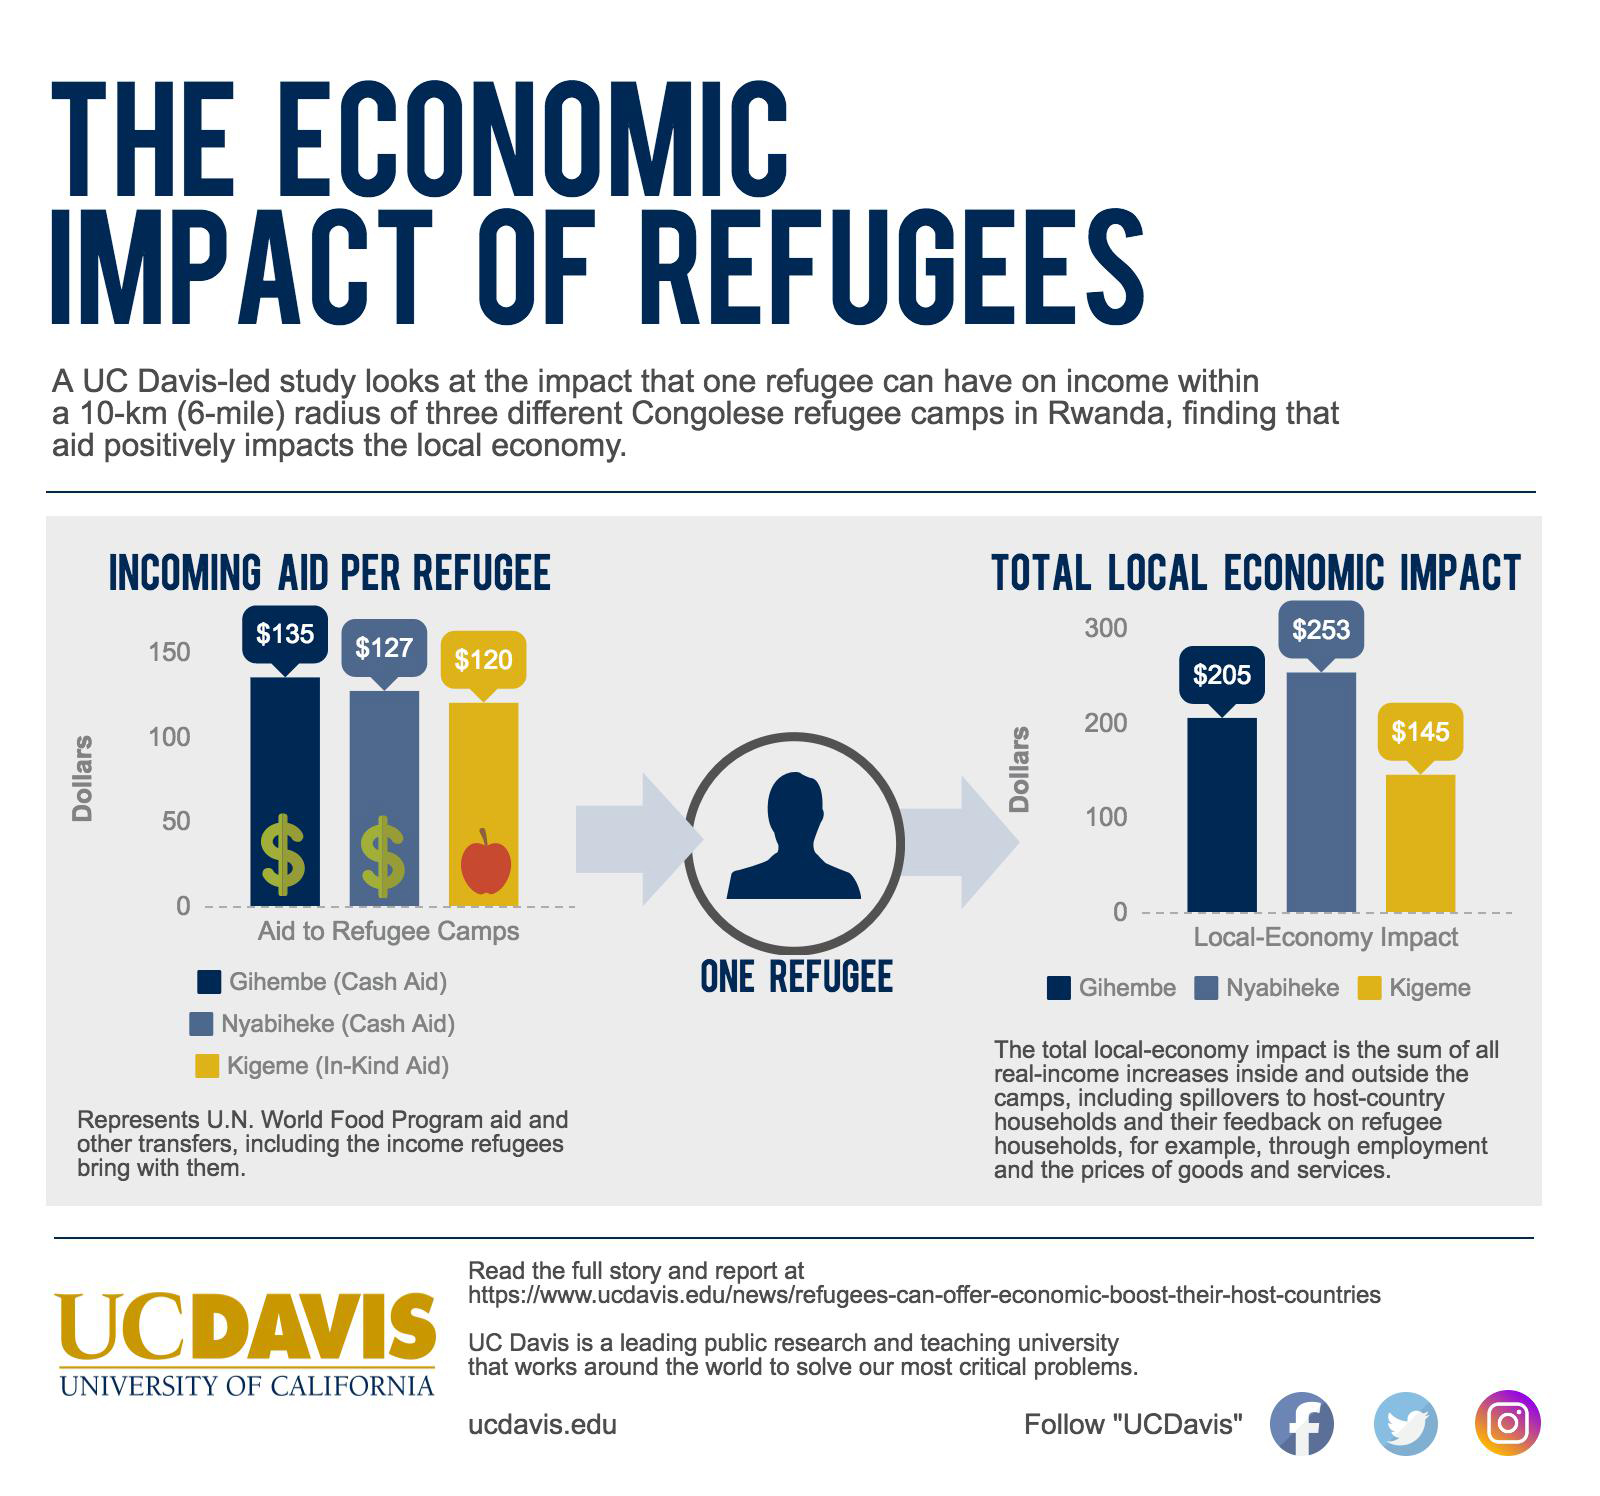 Infographic shows economic impact of refugees on host country.